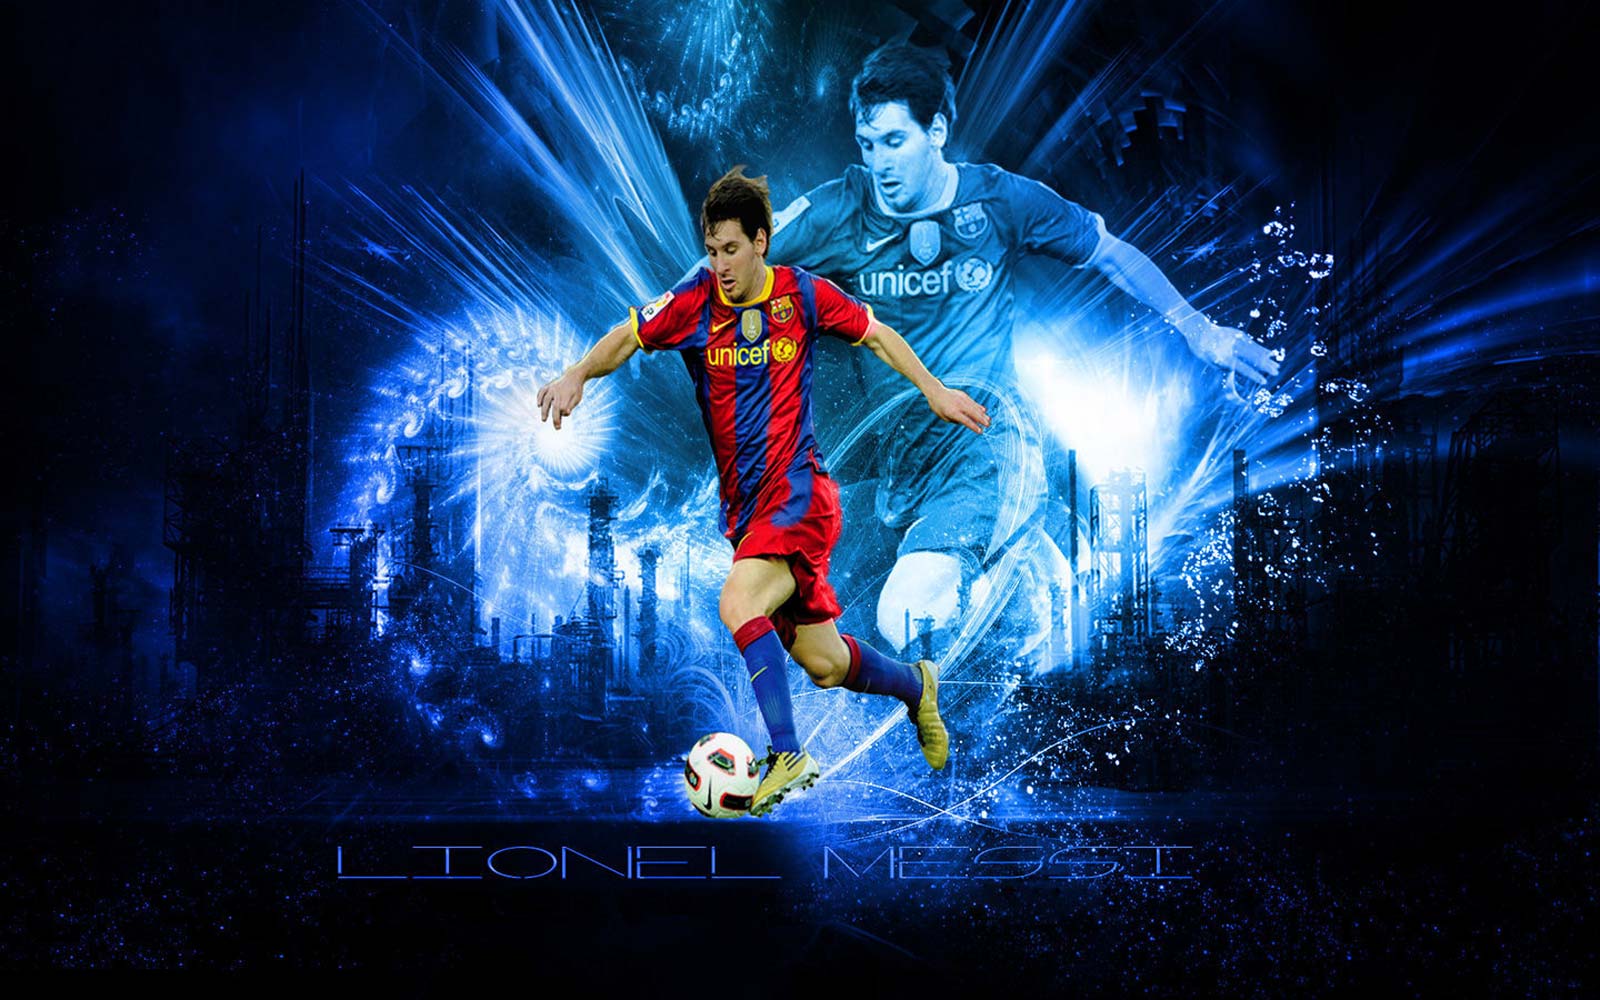 All Wallpapers Lionel Messi hd New Nice Wallpapers 2013